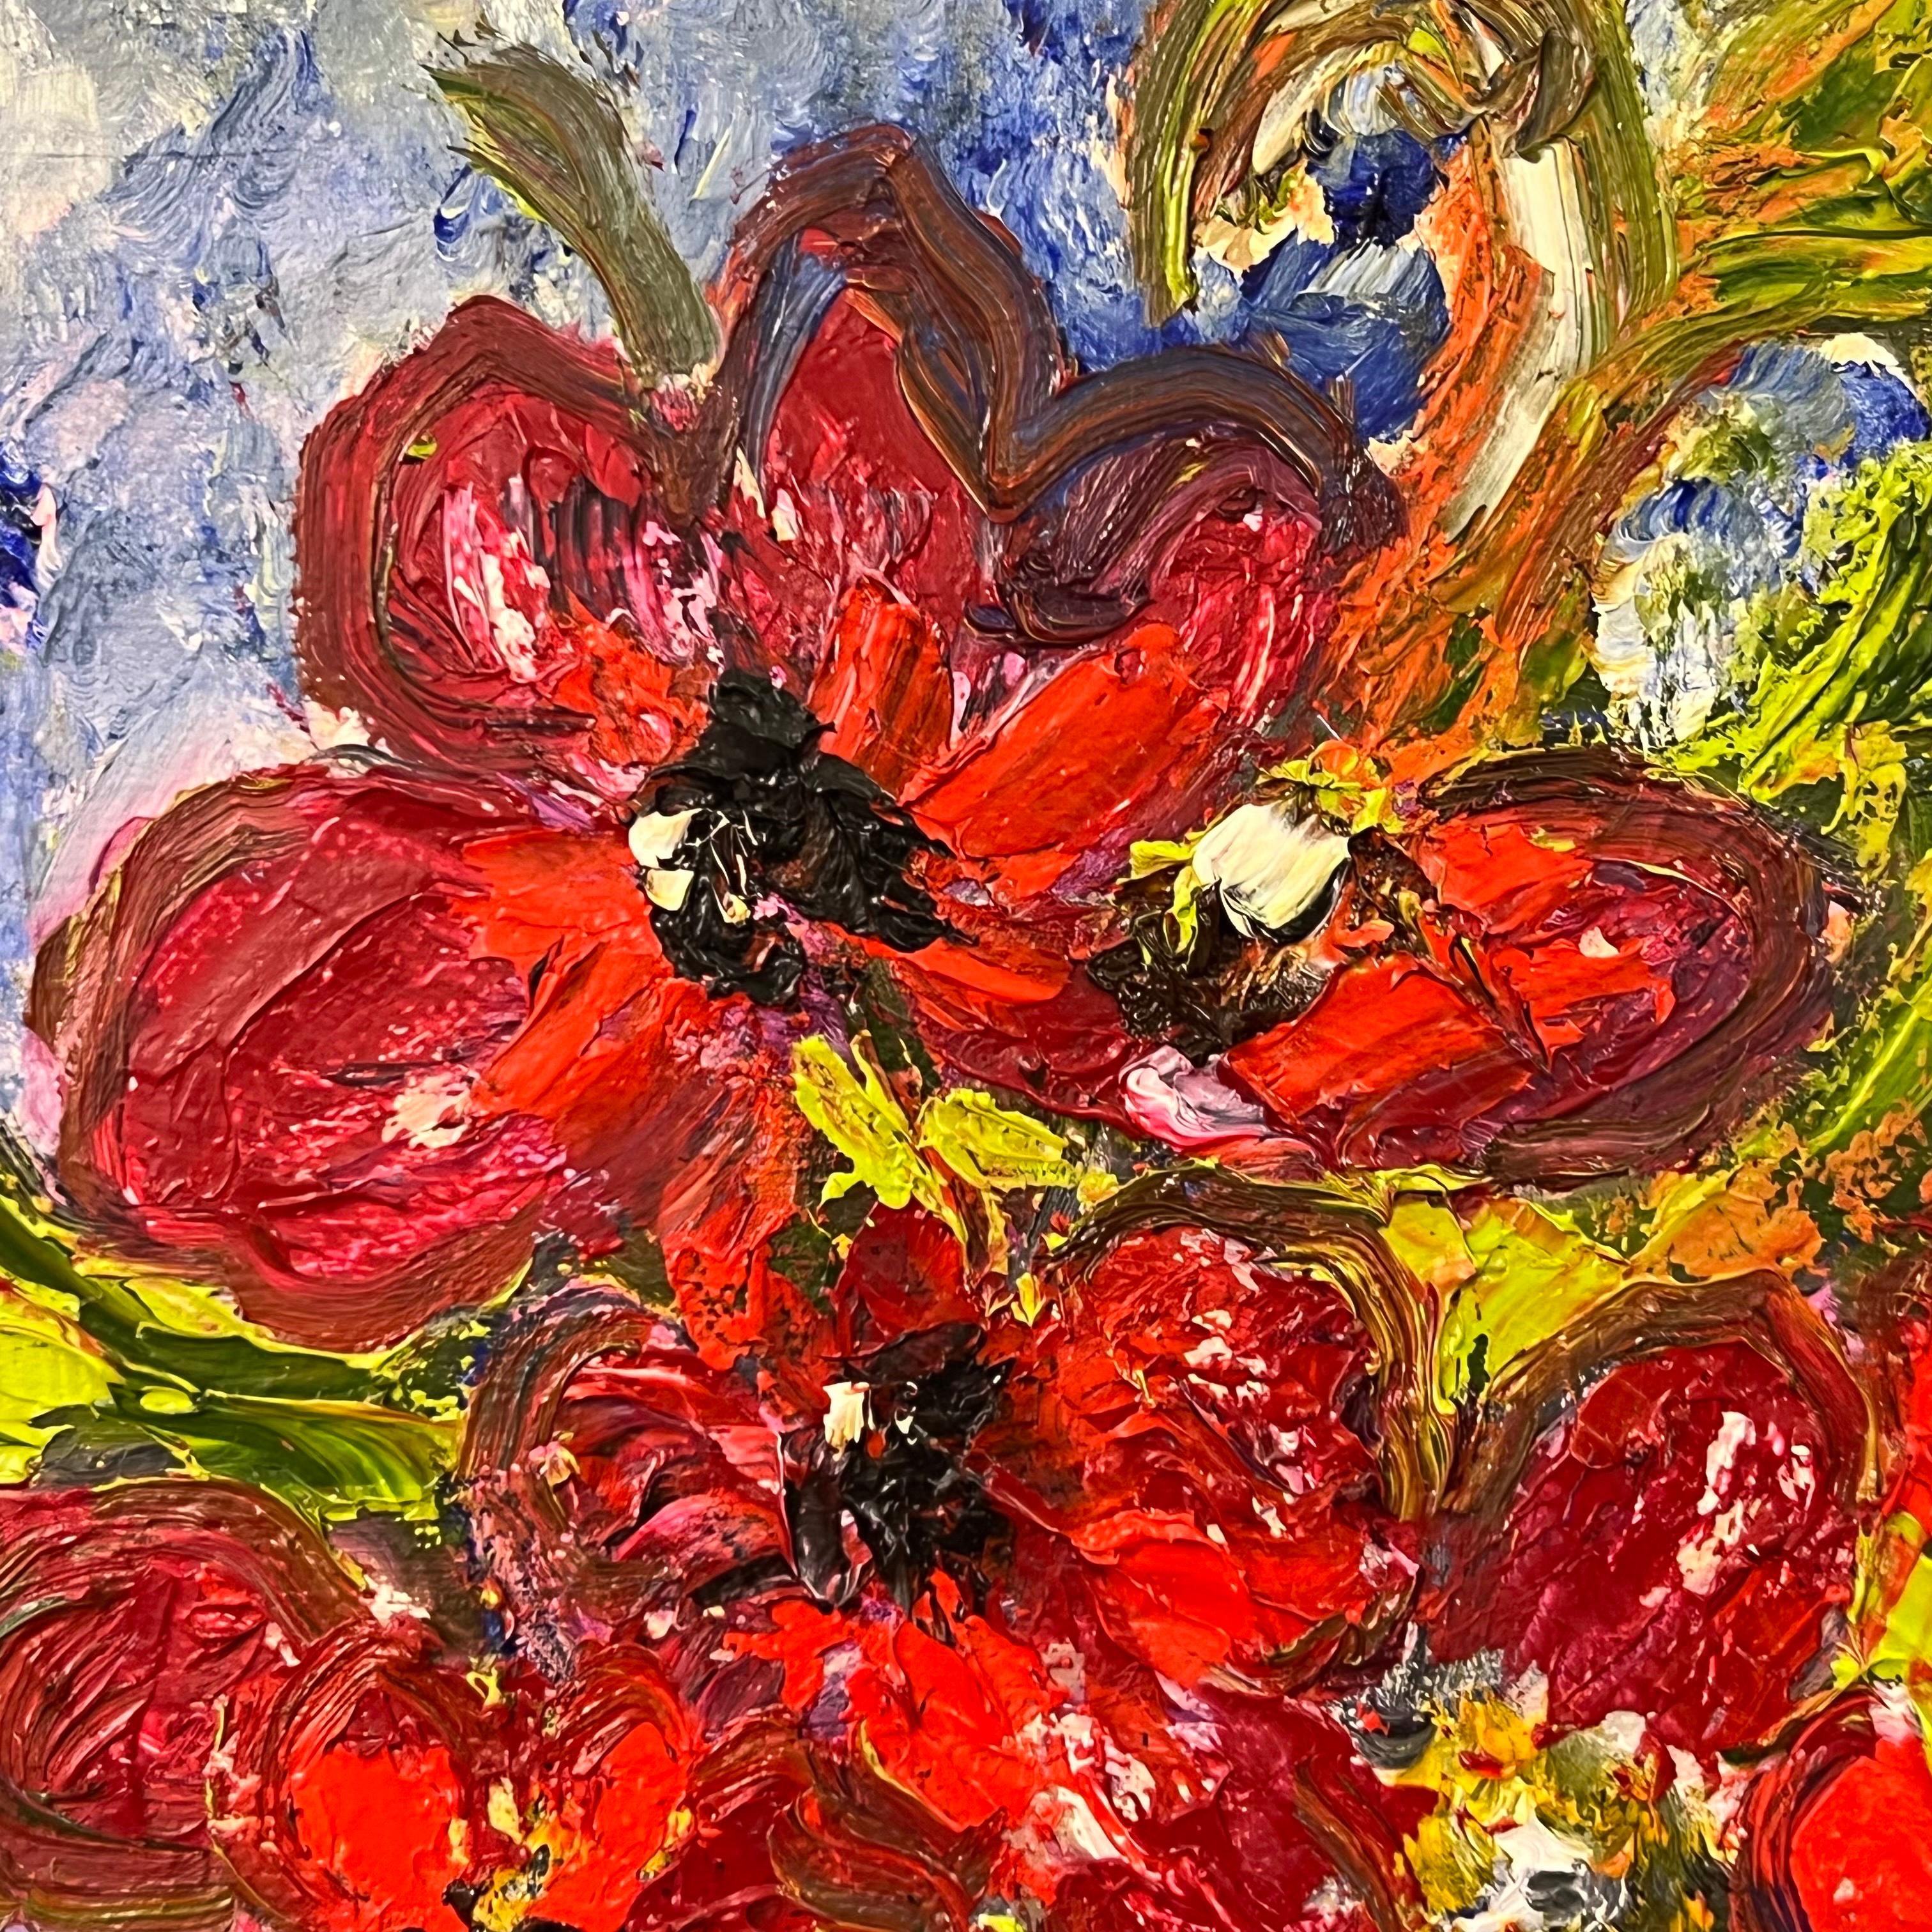 Expressive Still Life Painting Red Rose Flowers 'Red for Love' by British Artist For Sale 6